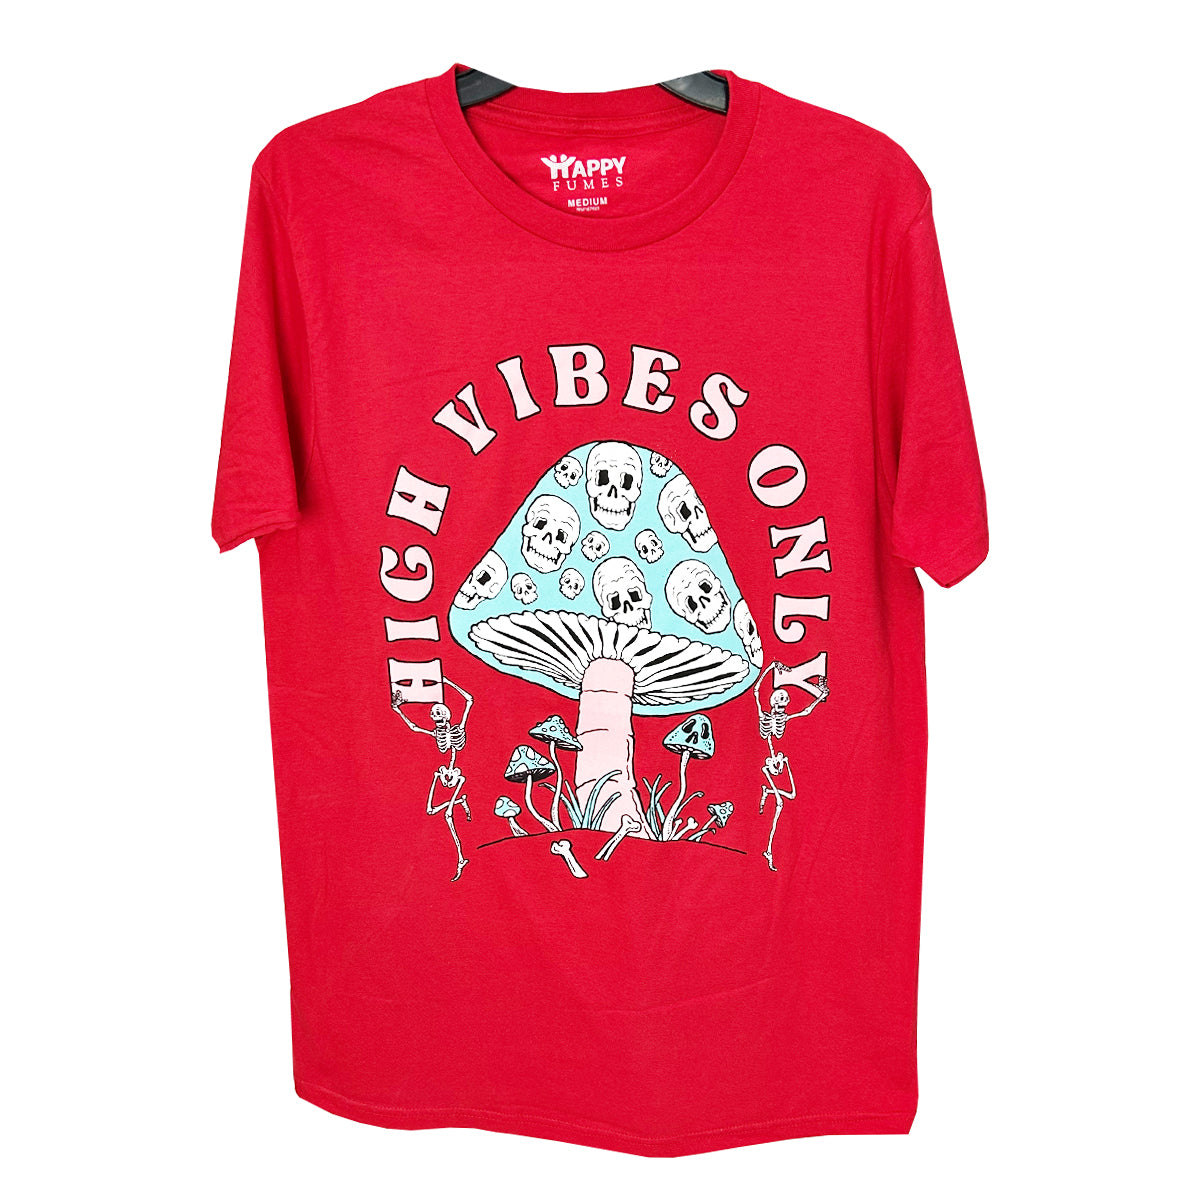 High Vibes Only SHORT Sleeve T-Shirt - Pack of 6 Units 1S, 2M, 2L, 1XL